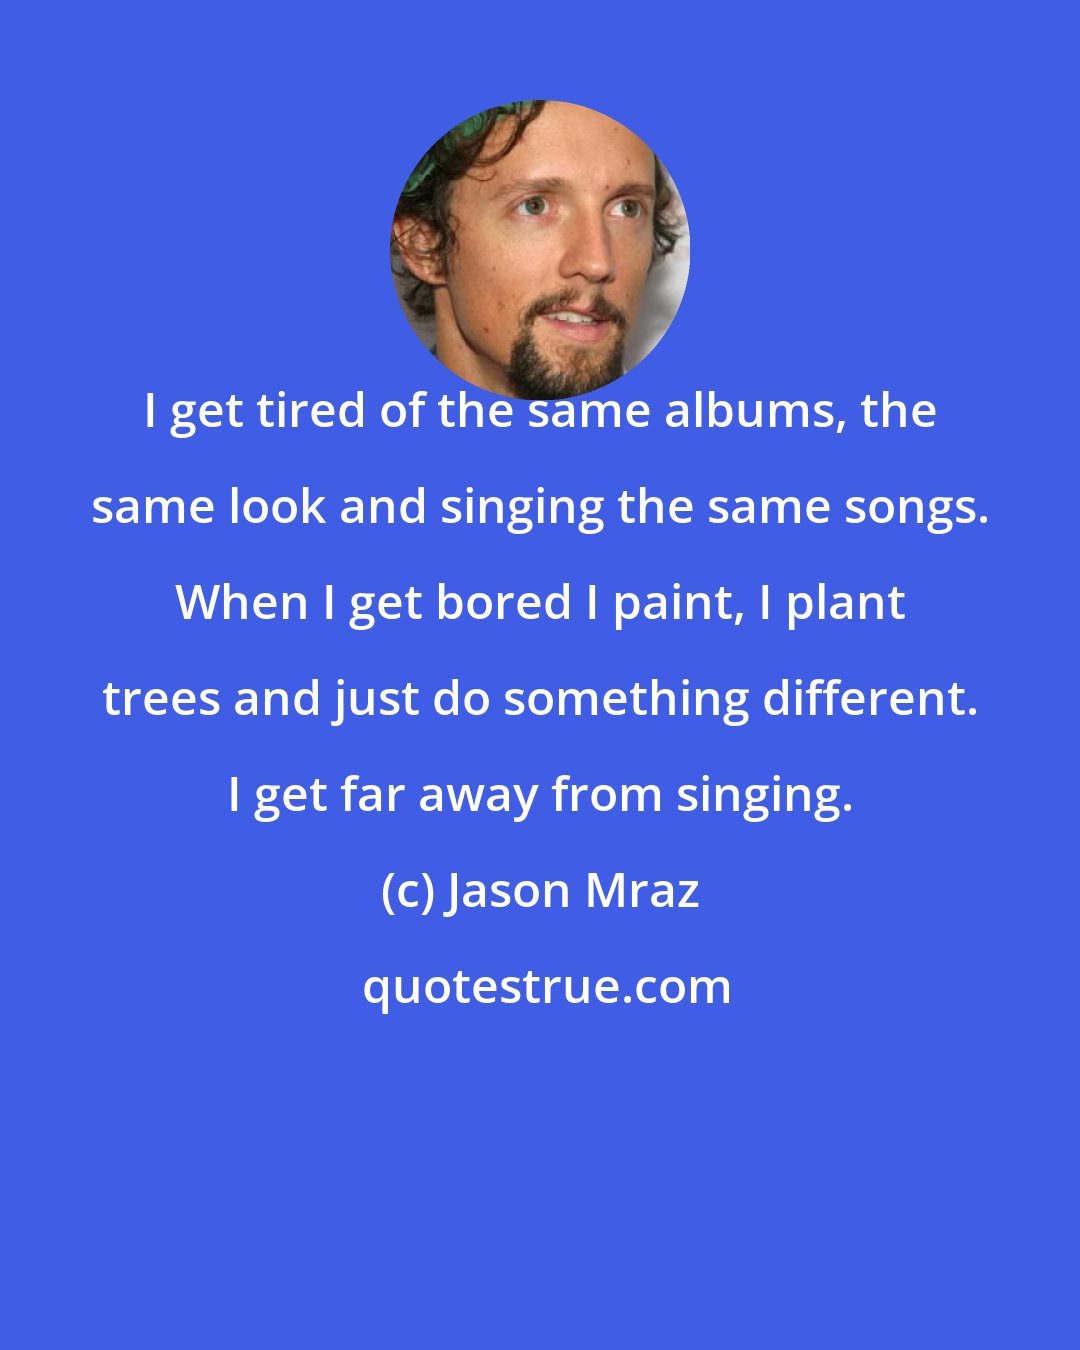 Jason Mraz: I get tired of the same albums, the same look and singing the same songs. When I get bored I paint, I plant trees and just do something different. I get far away from singing.